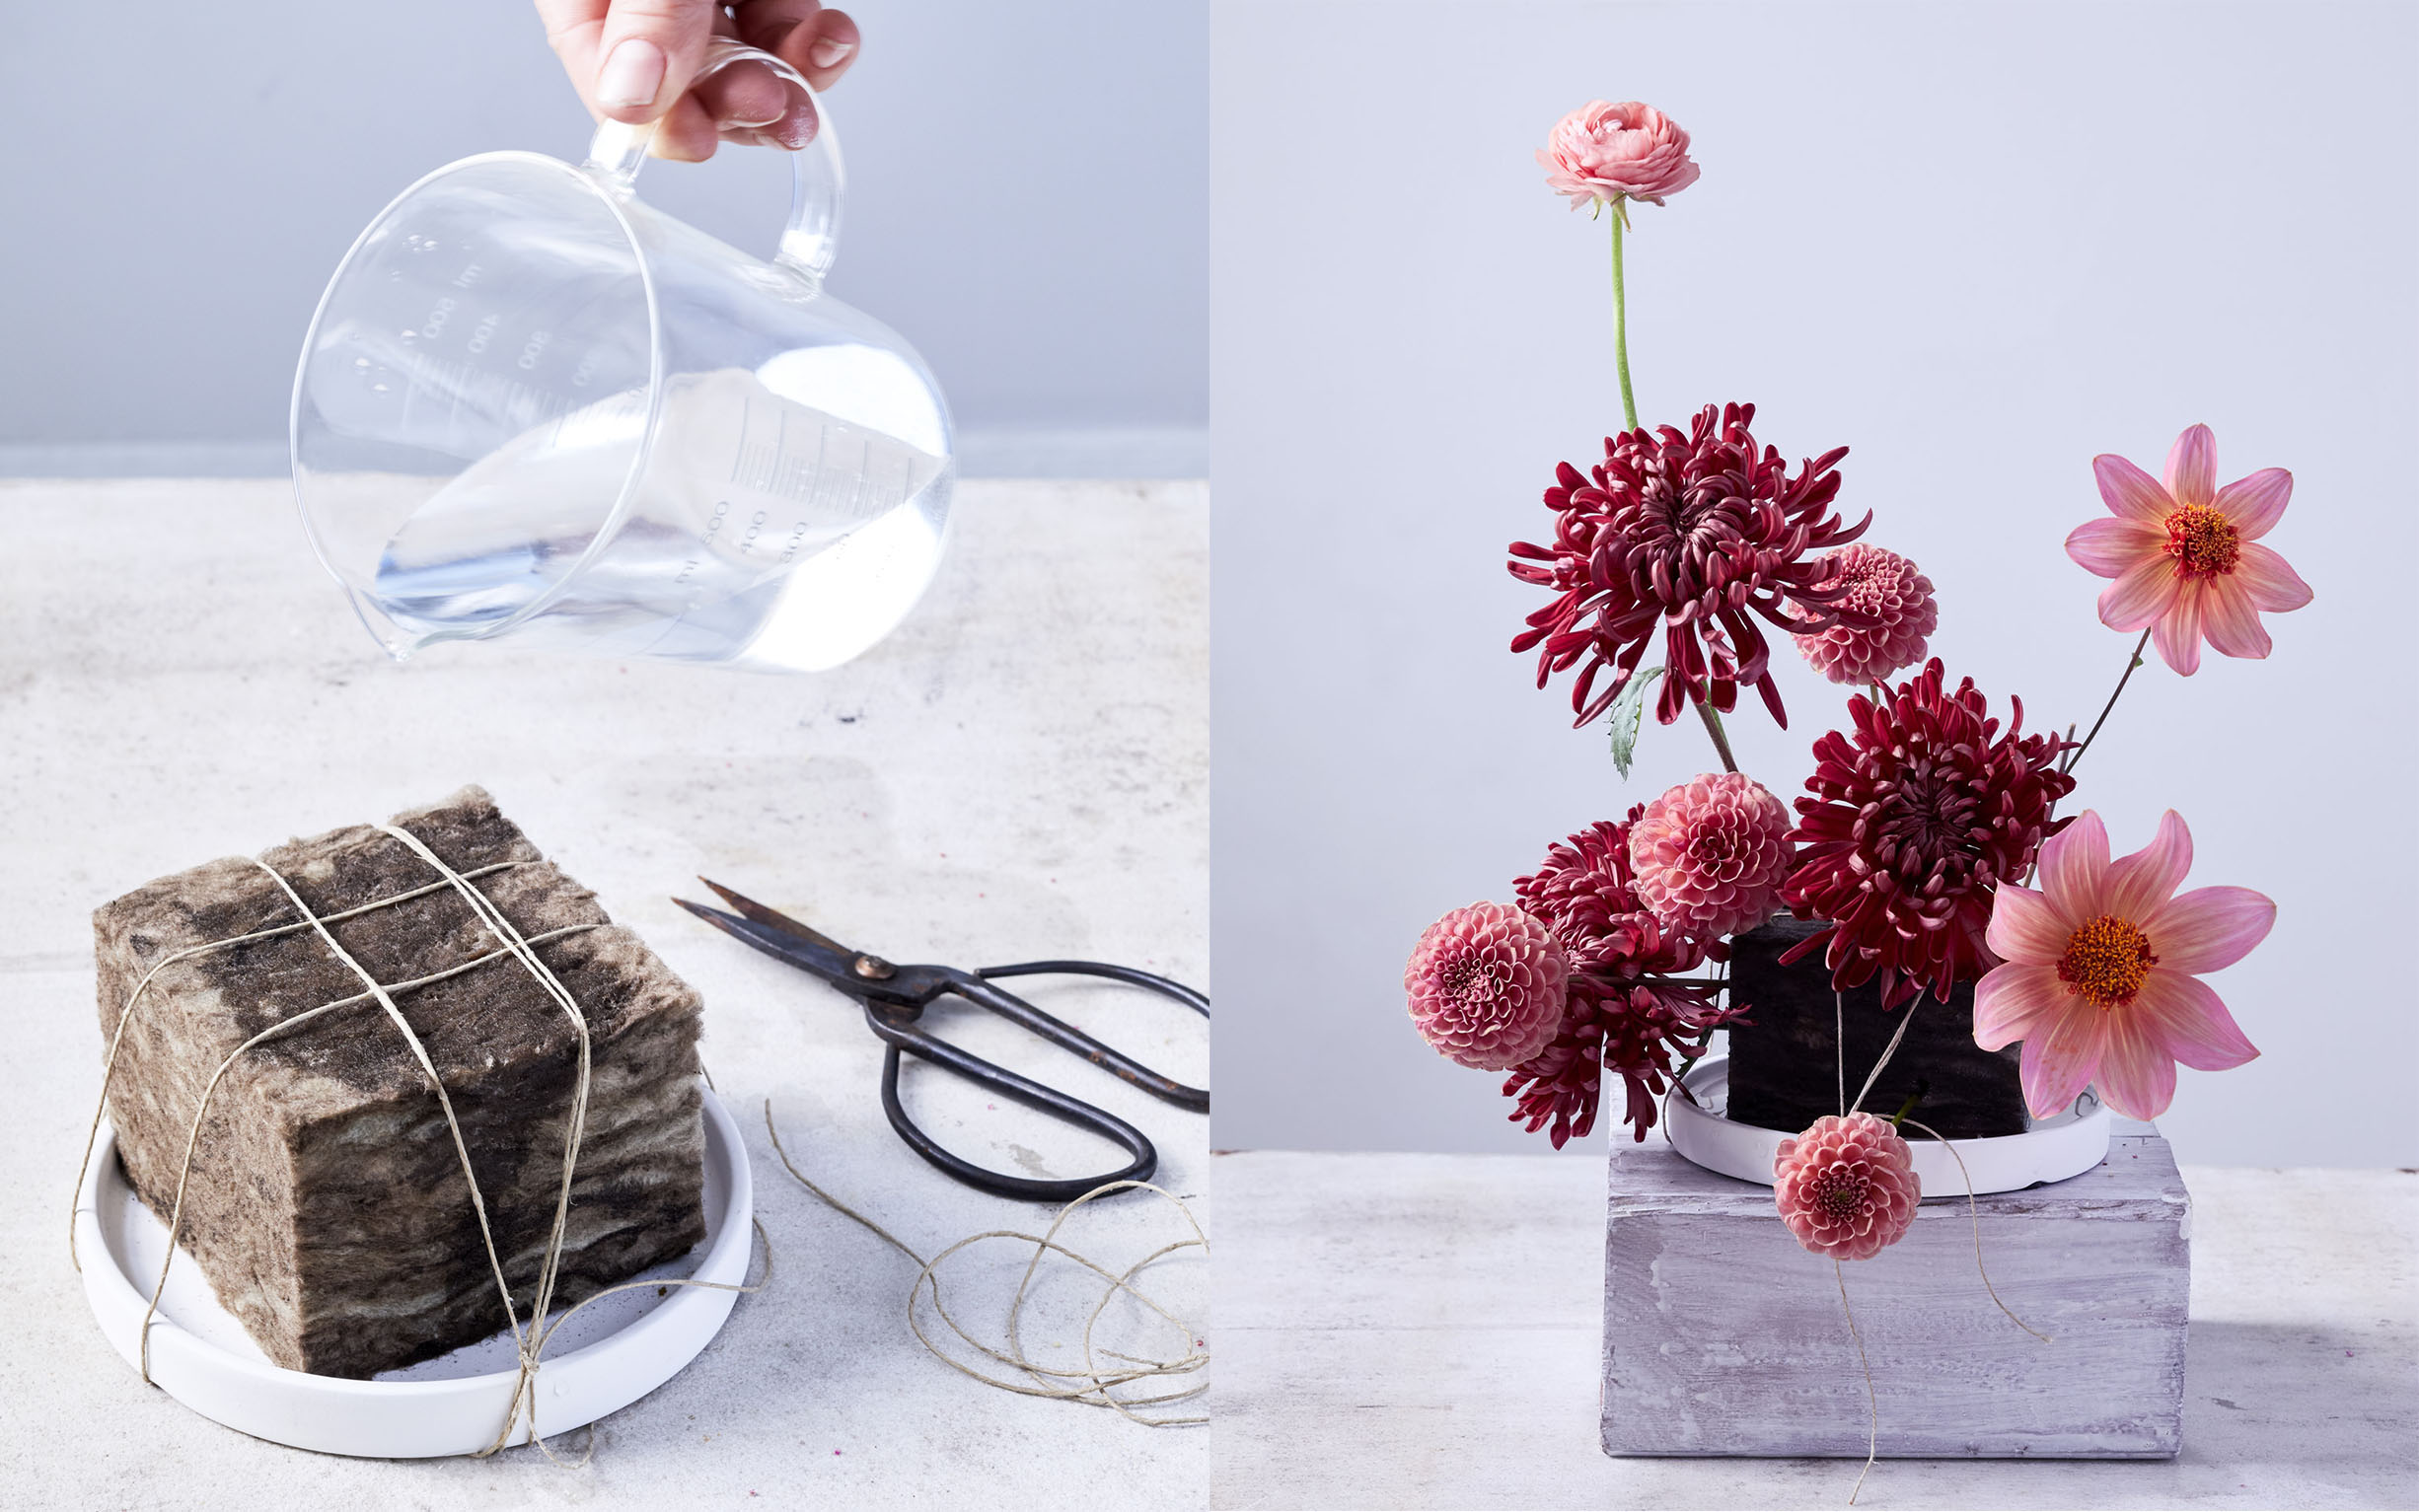 Any tips on using chicken wire instead of floral foam? : r/FloralDesign